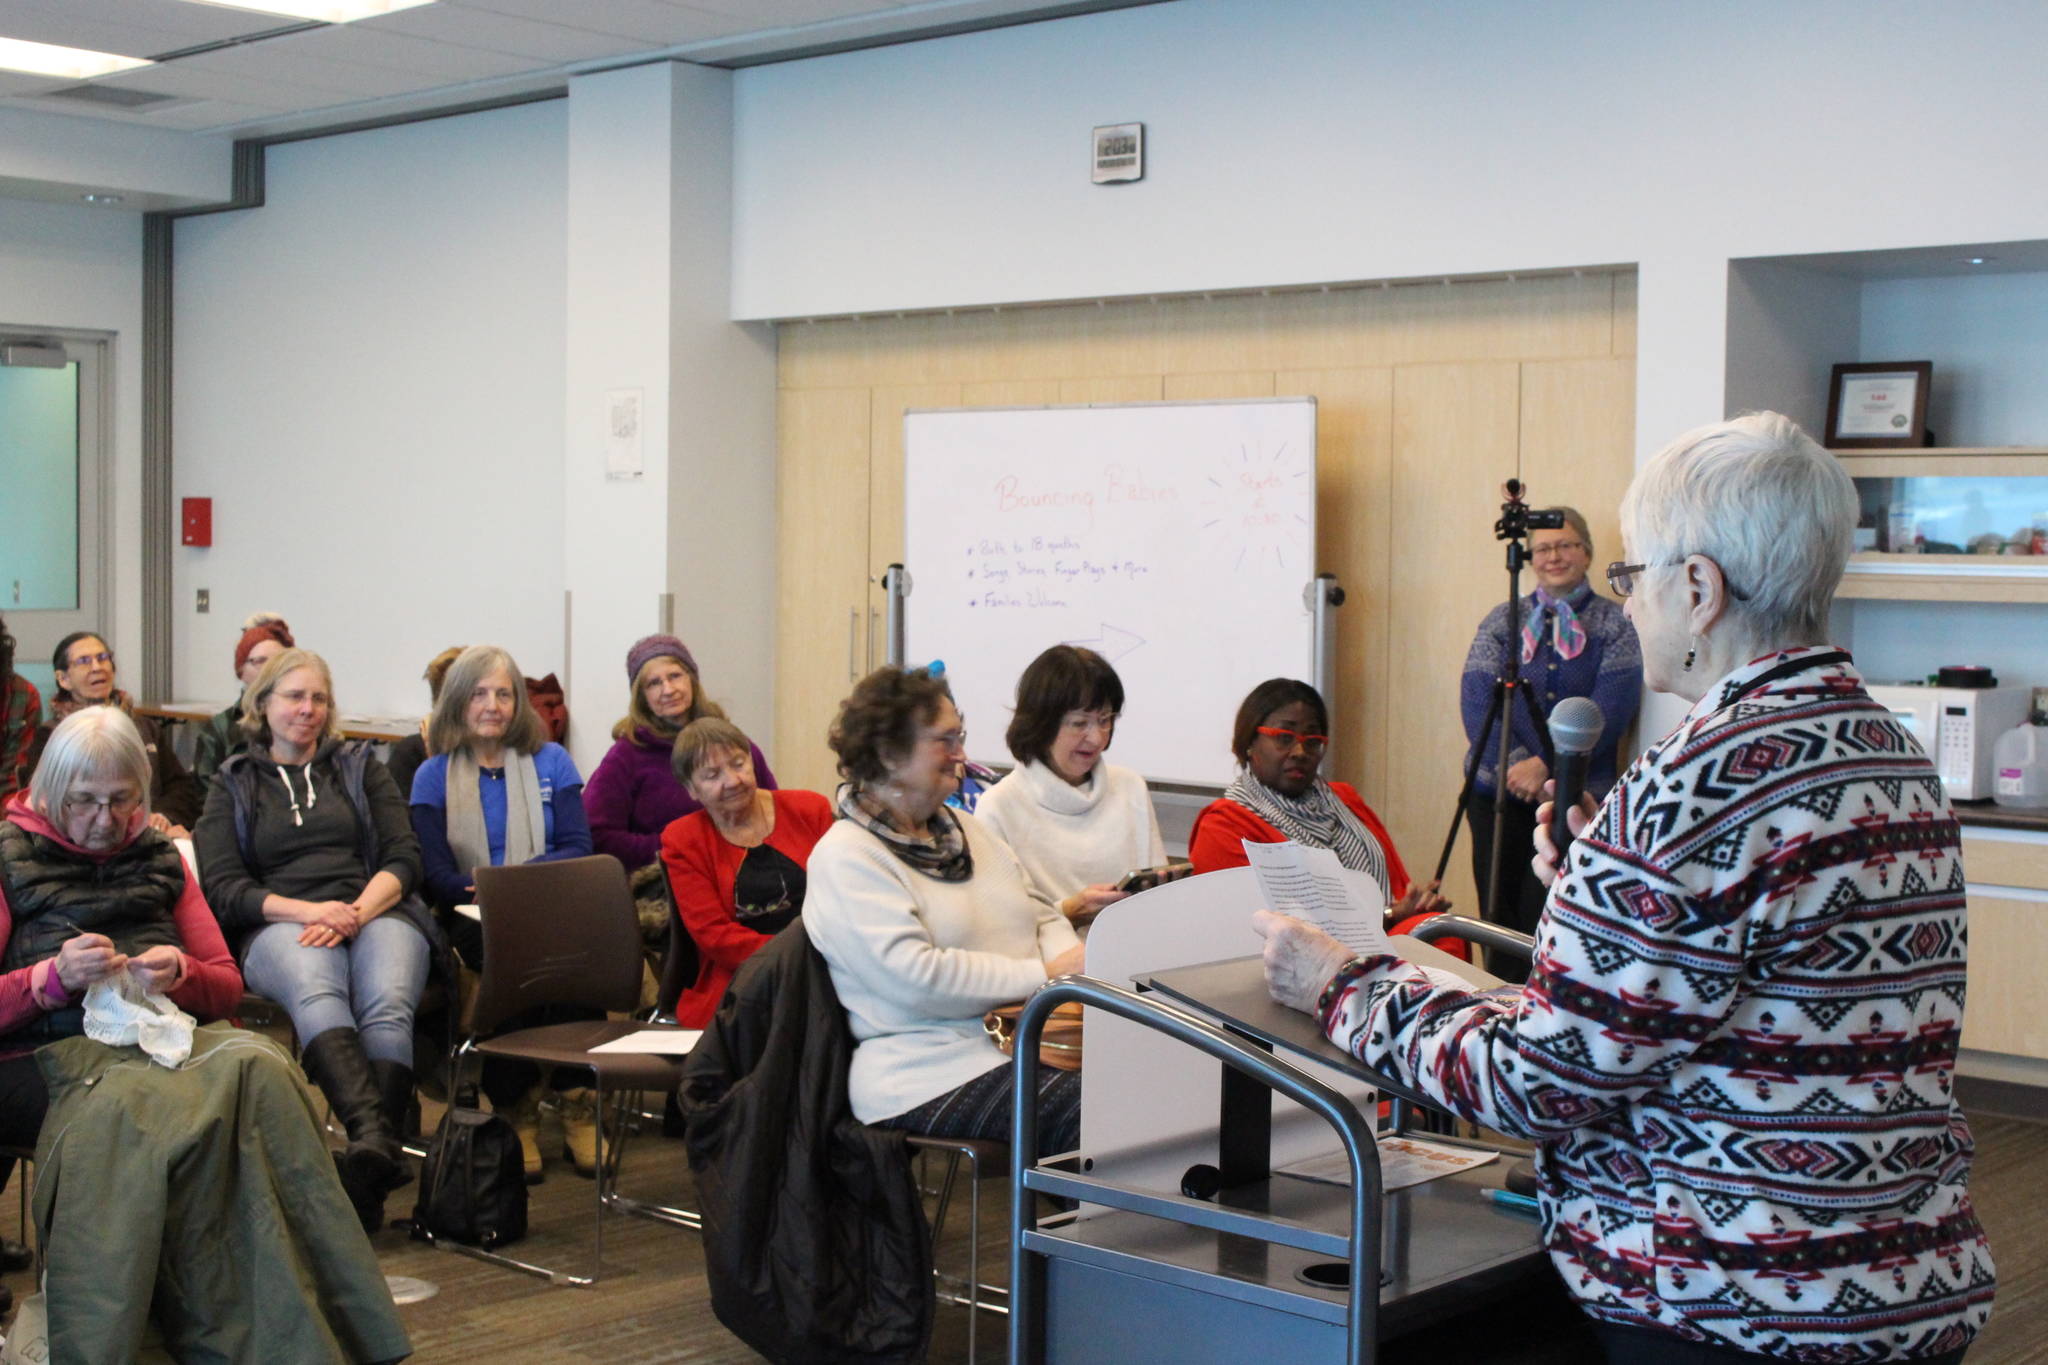 Marilyn Wheeless speaks to attendees of the Centennial Voices event at the Soldotna Public Library in Soldotna, Alaska, on Saturday, Jan. 25, 2020. (Photo by Brian Mazurek/Peninsula Clarion)